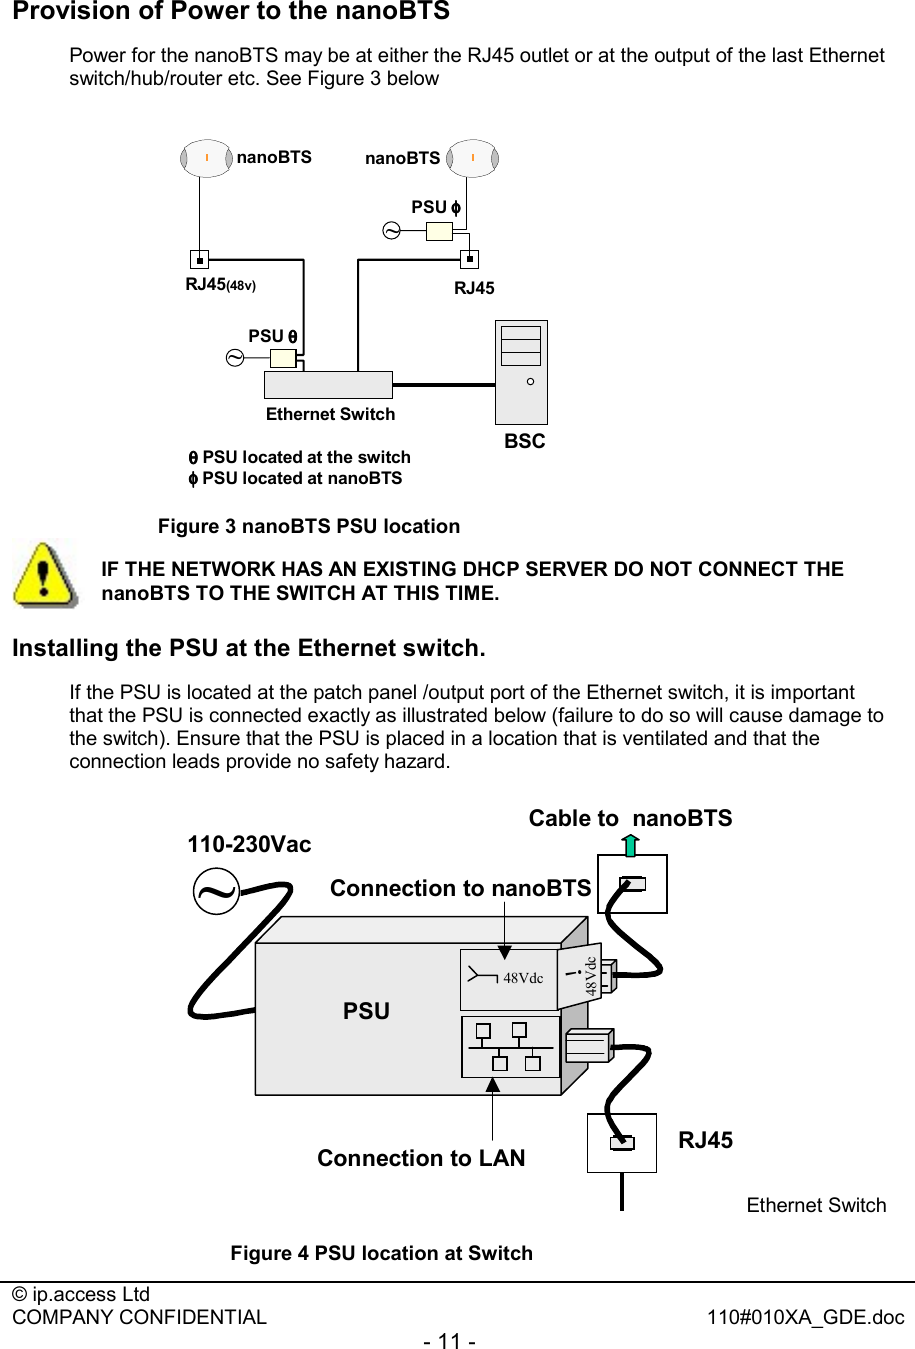  © ip.access Ltd   COMPANY CONFIDENTIAL  110#010XA_GDE.doc - 11 -  Provision of Power to the nanoBTS Power for the nanoBTS may be at either the RJ45 outlet or at the output of the last Ethernet switch/hub/router etc. See Figure 3 below Ethernet SwitchnanoBTS nanoBTSBSCRJ45(48v)~~RJ45PSU φφφφPSU θθθθθθθθPSU located at the switchφφφφPSU located at nanoBTS Figure 3 nanoBTS PSU location  Installing the PSU at the Ethernet switch. If the PSU is located at the patch panel /output port of the Ethernet switch, it is important that the PSU is connected exactly as illustrated below (failure to do so will cause damage to the switch). Ensure that the PSU is placed in a location that is ventilated and that the connection leads provide no safety hazard. ~PSU48Vdc48Vdc!110-230VacRJ45Connection to LANConnection to nanoBTSCable to  nanoBTSEthernet Switch Figure 4 PSU location at Switch IF THE NETWORK HAS AN EXISTING DHCP SERVER DO NOT CONNECT THE nanoBTS TO THE SWITCH AT THIS TIME. 